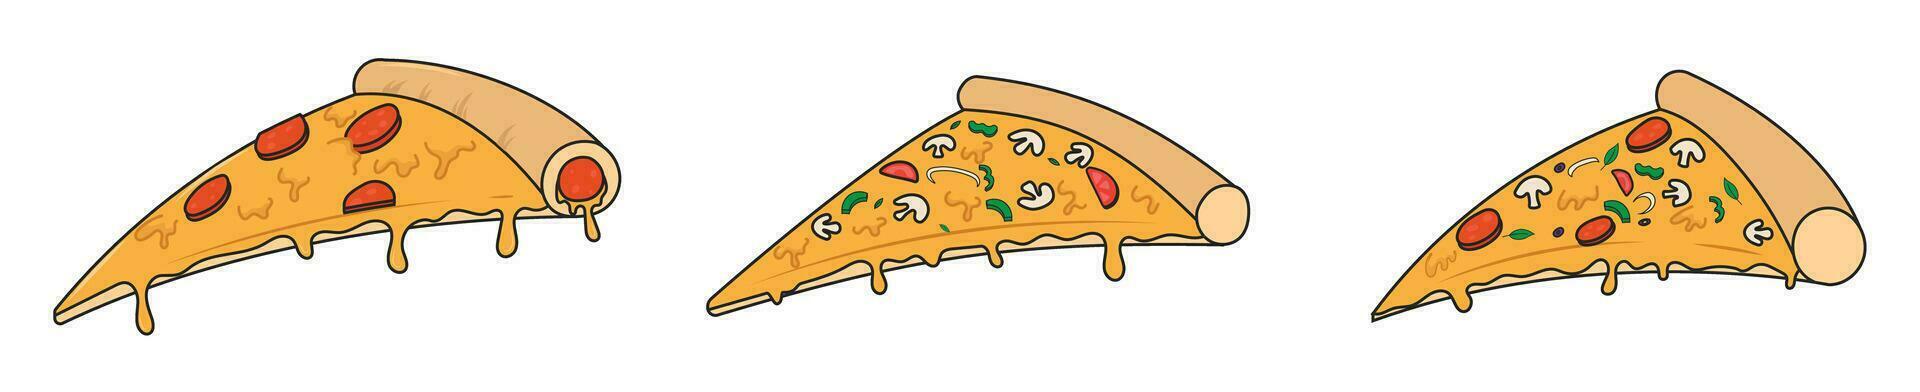 a slice of pizza piece of pepperoni cheese pizza with mushroom topping vector